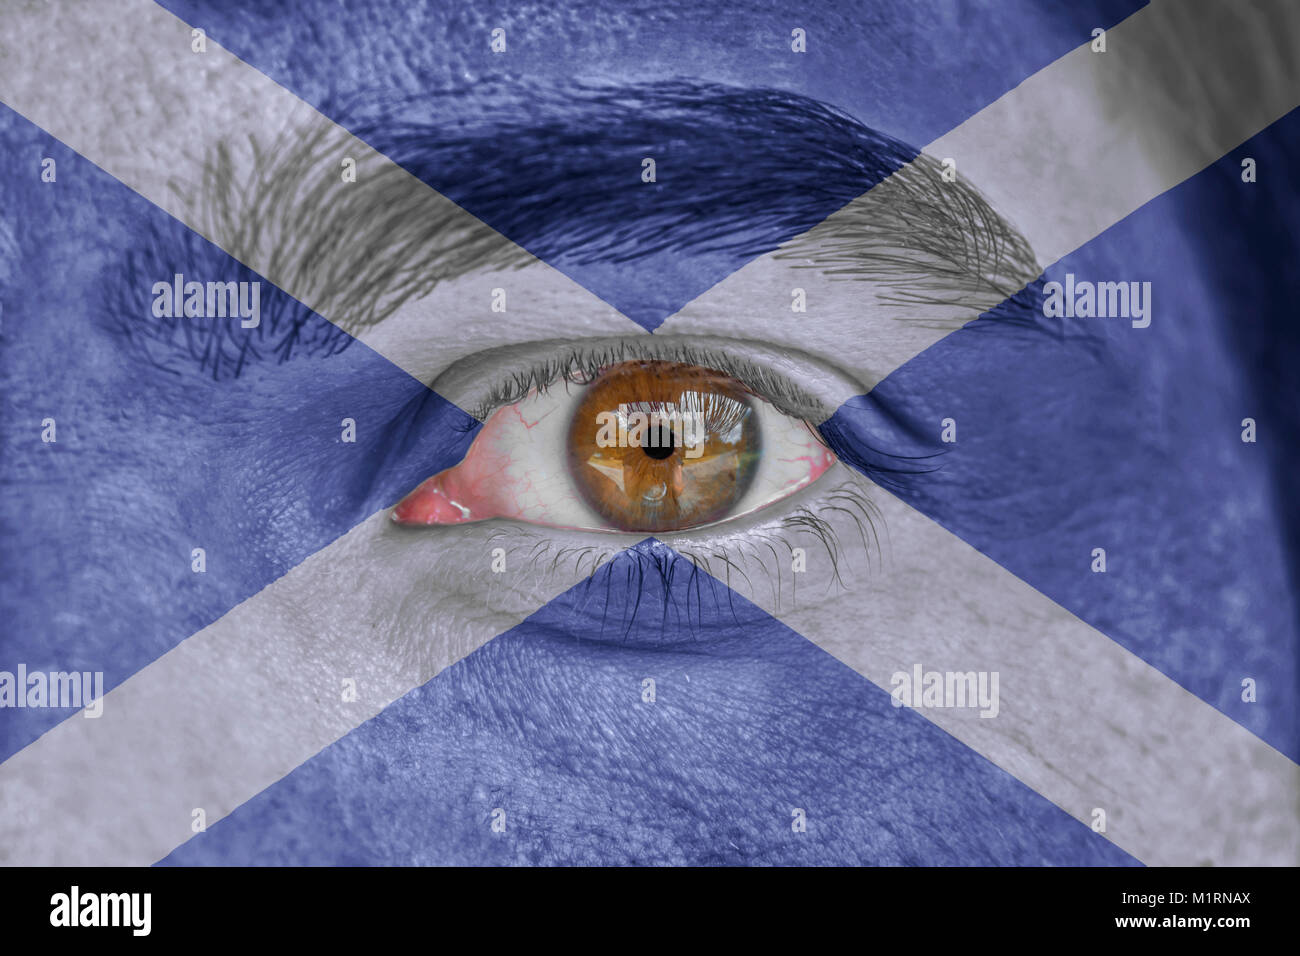 Human face and eye painted with flag of Sacotland Stock Photo